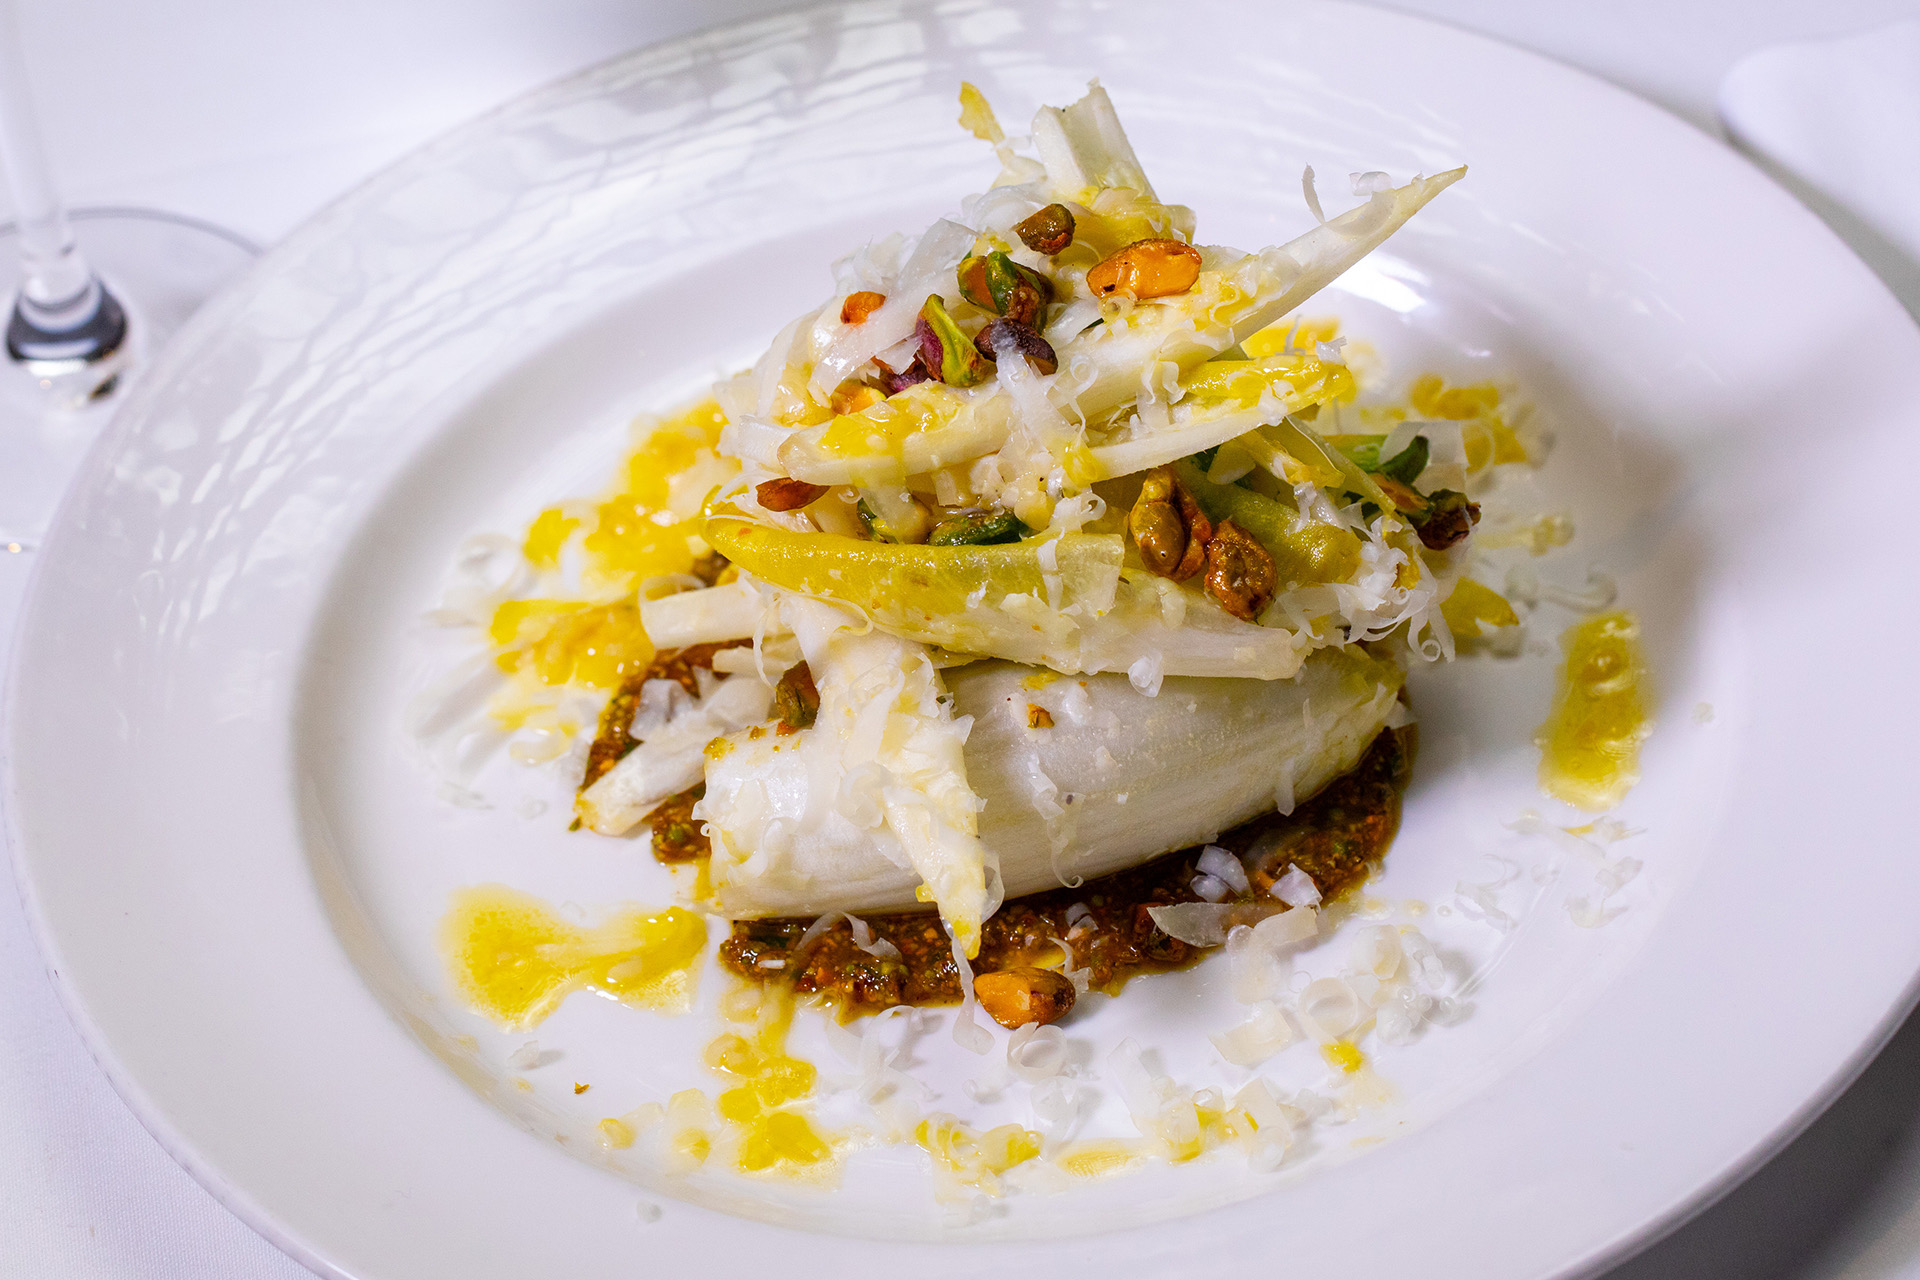 Endive Salad with Avocado Piave and Pistachio Aillade